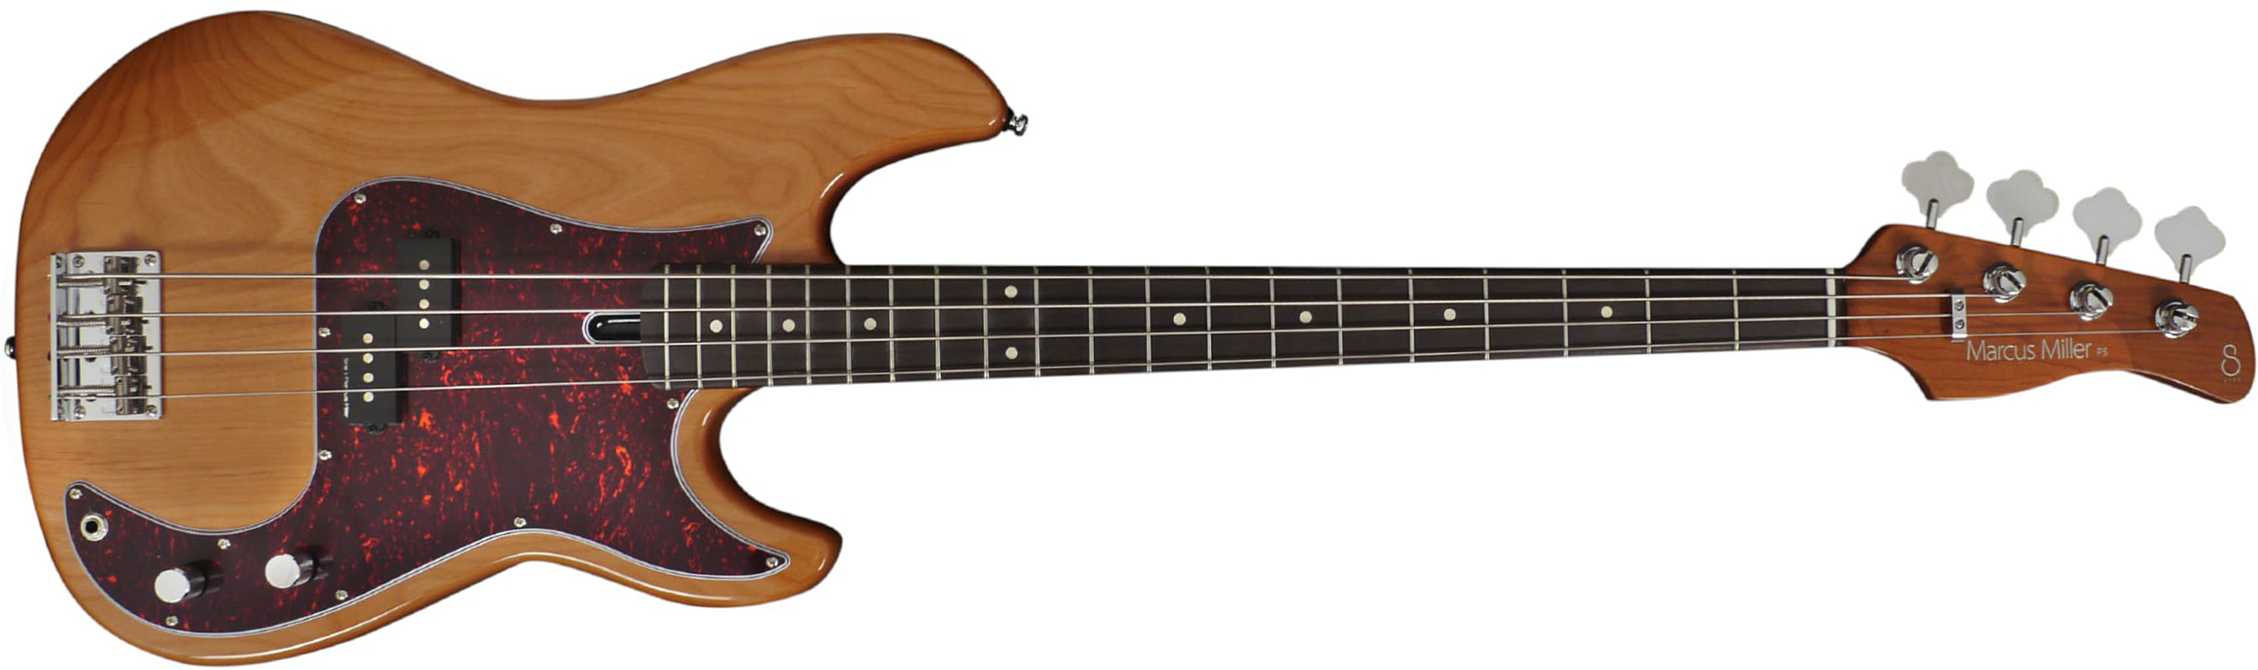 Marcus Miller P5r 4st Rw - Natural - Solidbody E-bass - Main picture